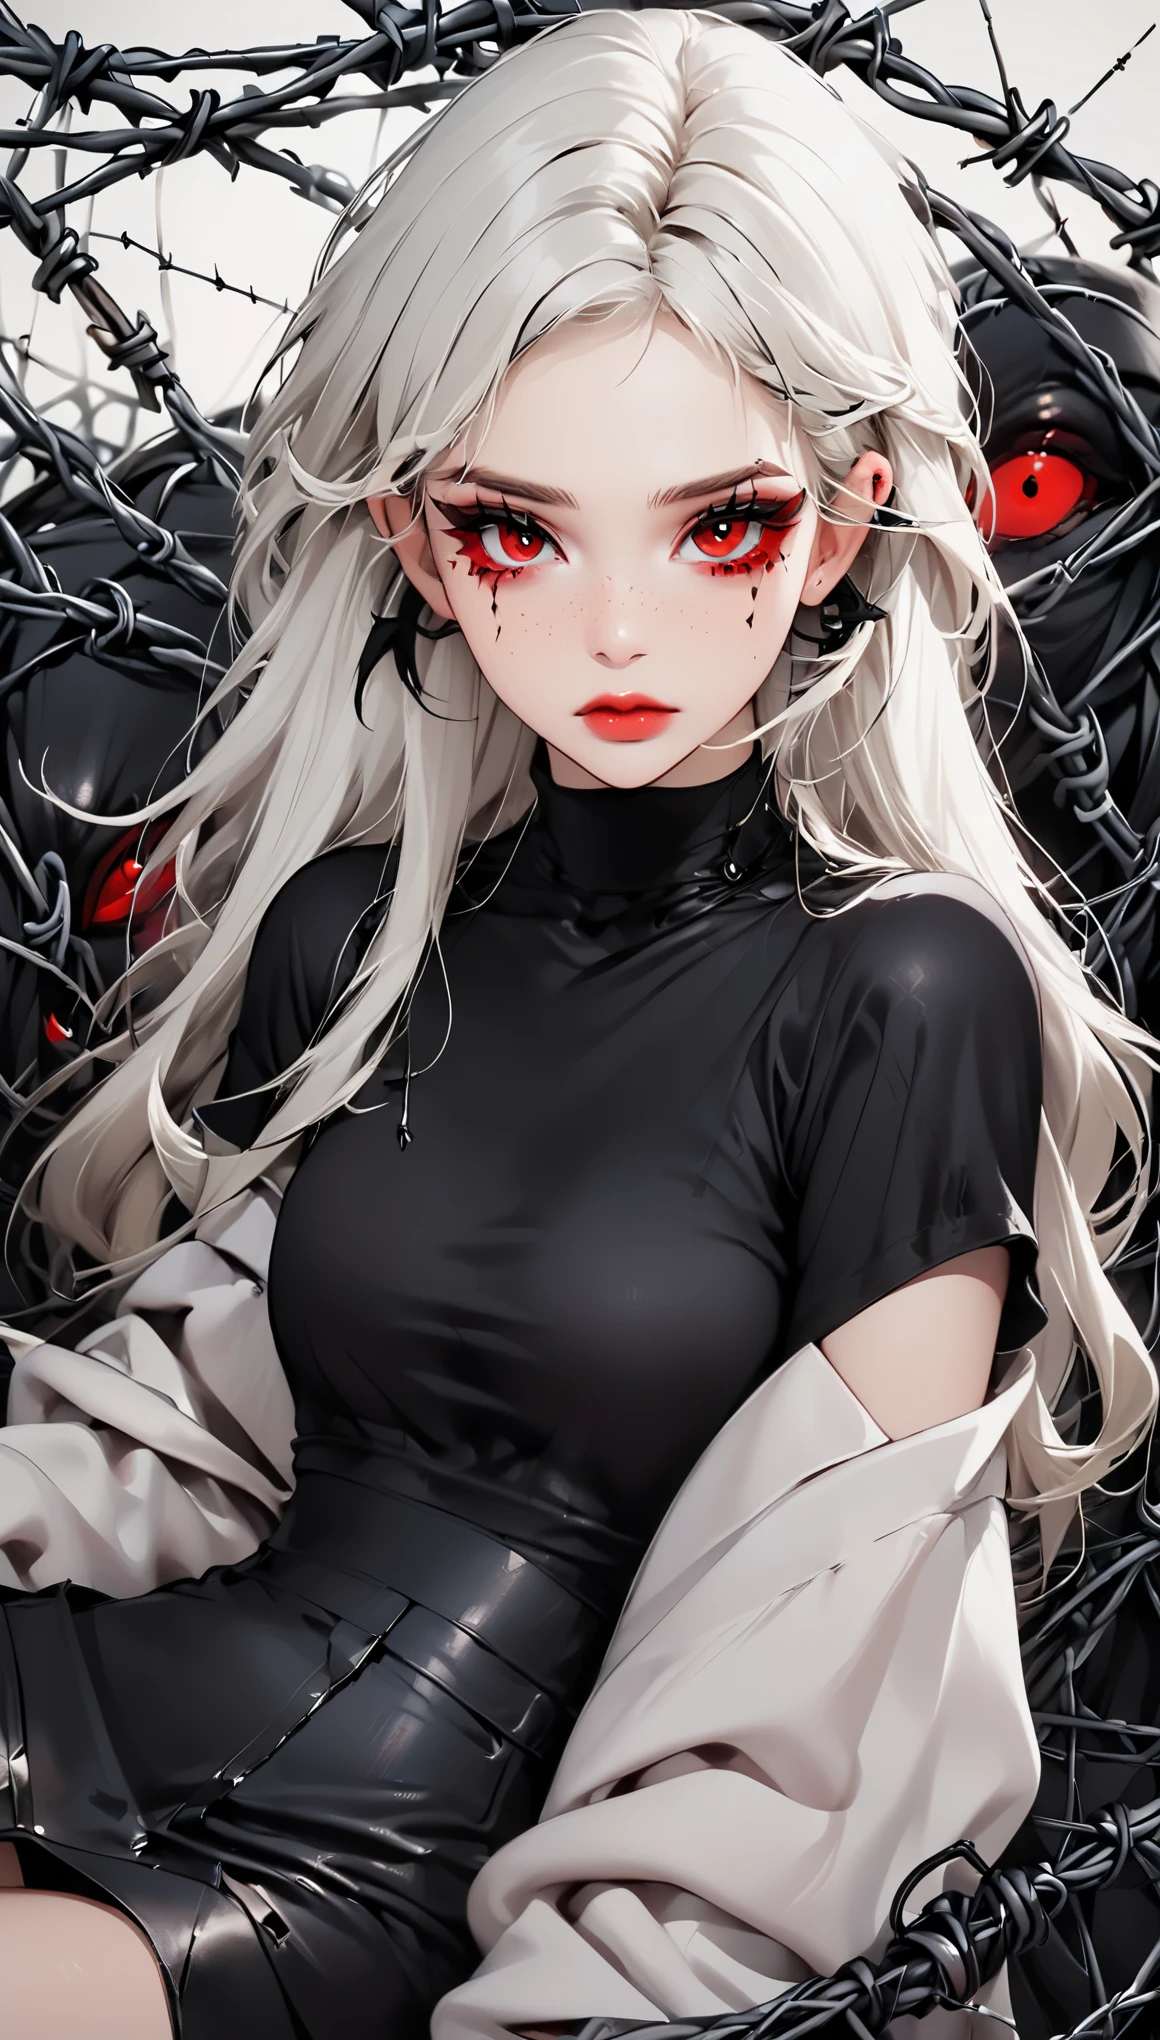 Beautiful young white-haired girl with piercing red eyes, half smile with full lips, black nails, barbed wires everywhere(coiled black barbed wires)